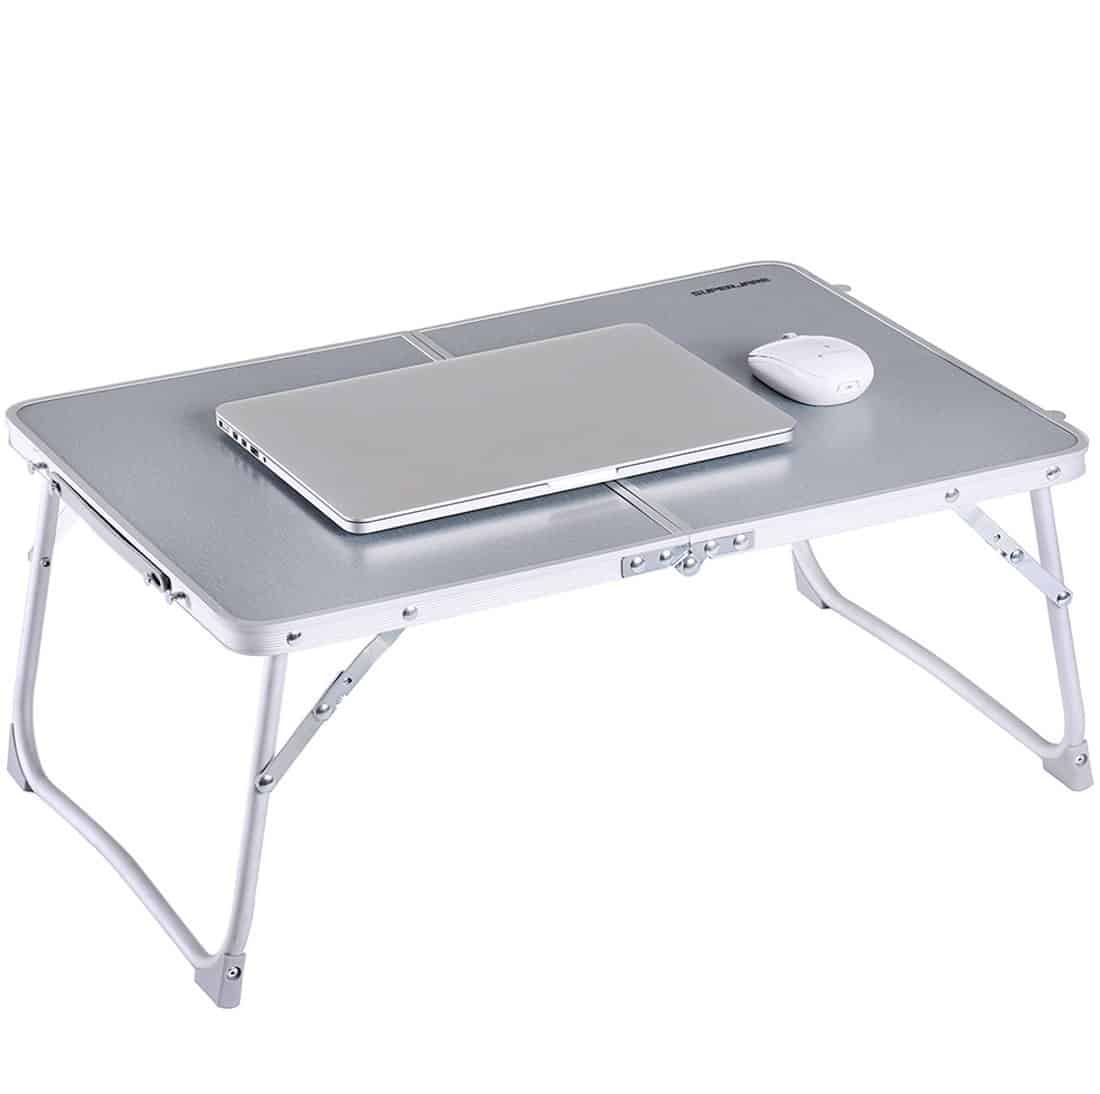 The Silver Foldable Laptop Table and Bed Desk